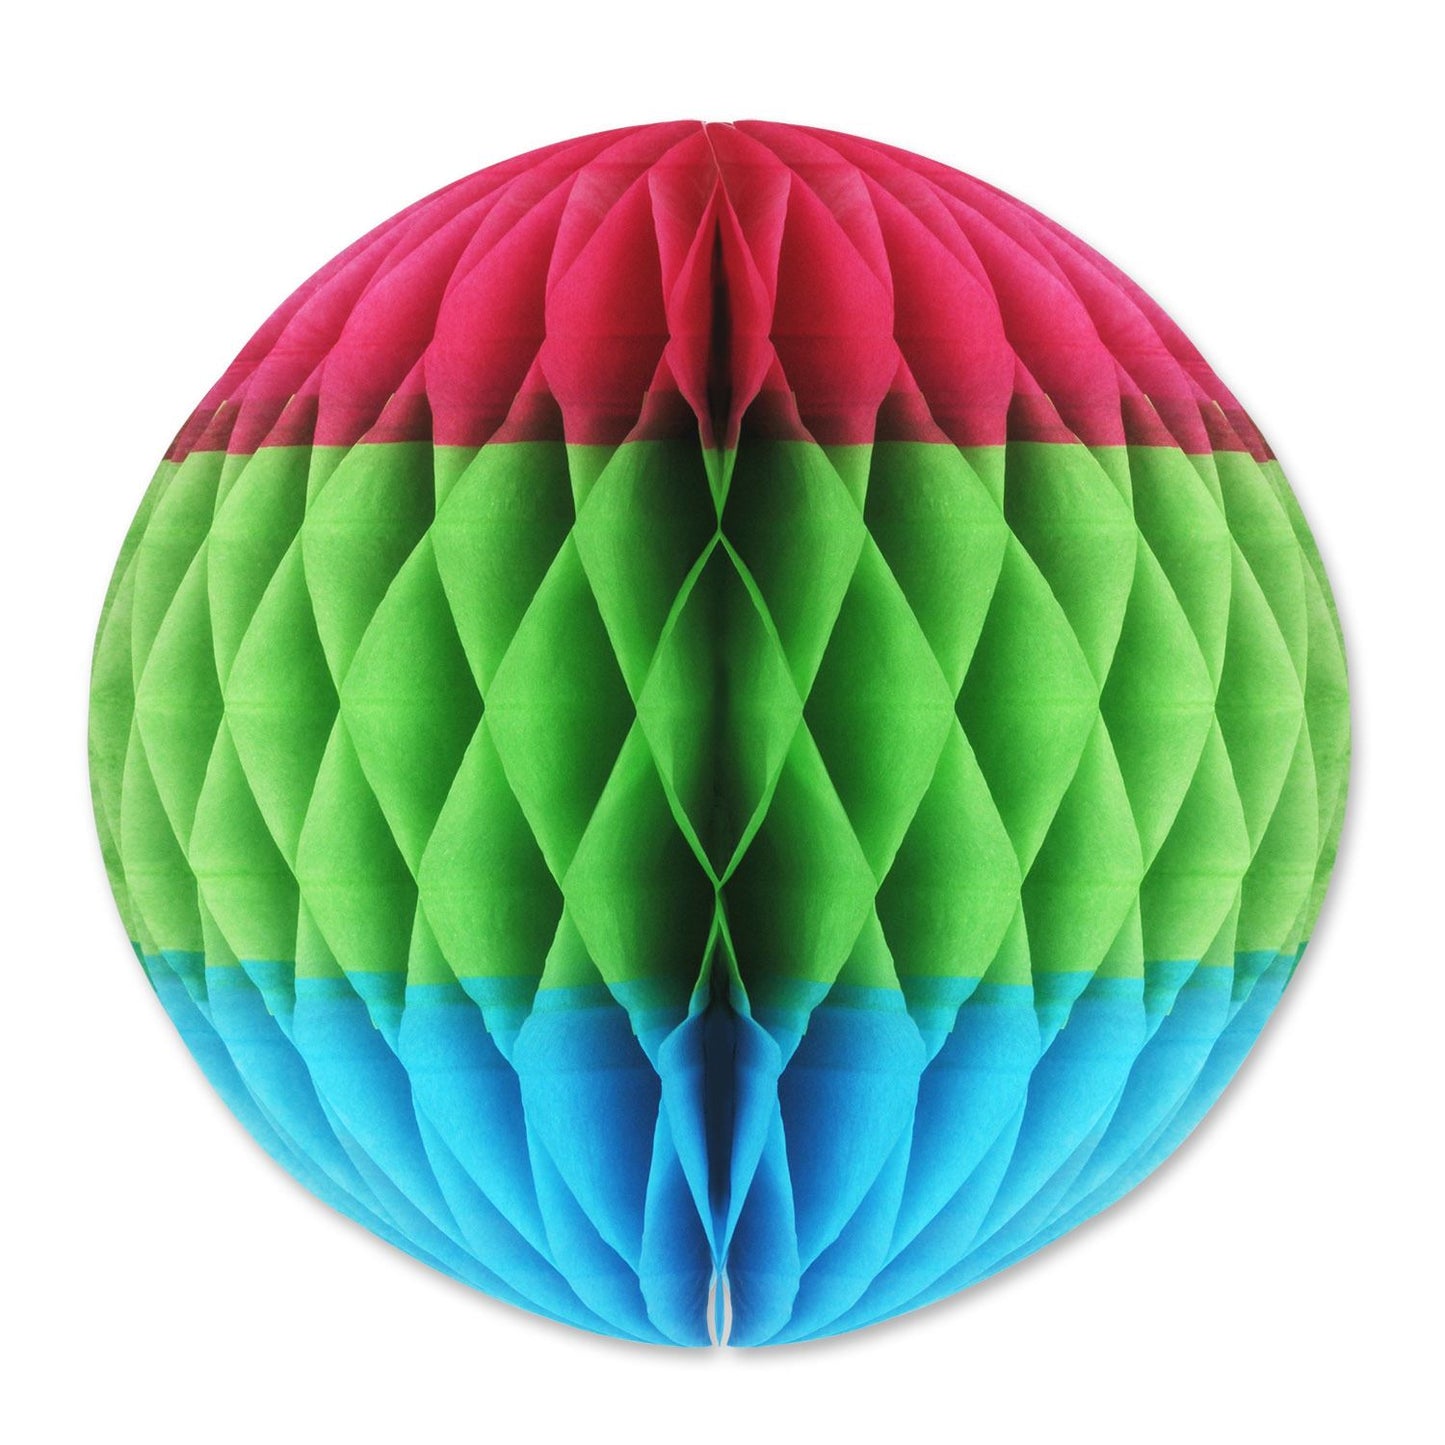 Beistle Cerise, Light Green, and Turquoise Art-Tissue Ball - Party Supply Decoration for Luau